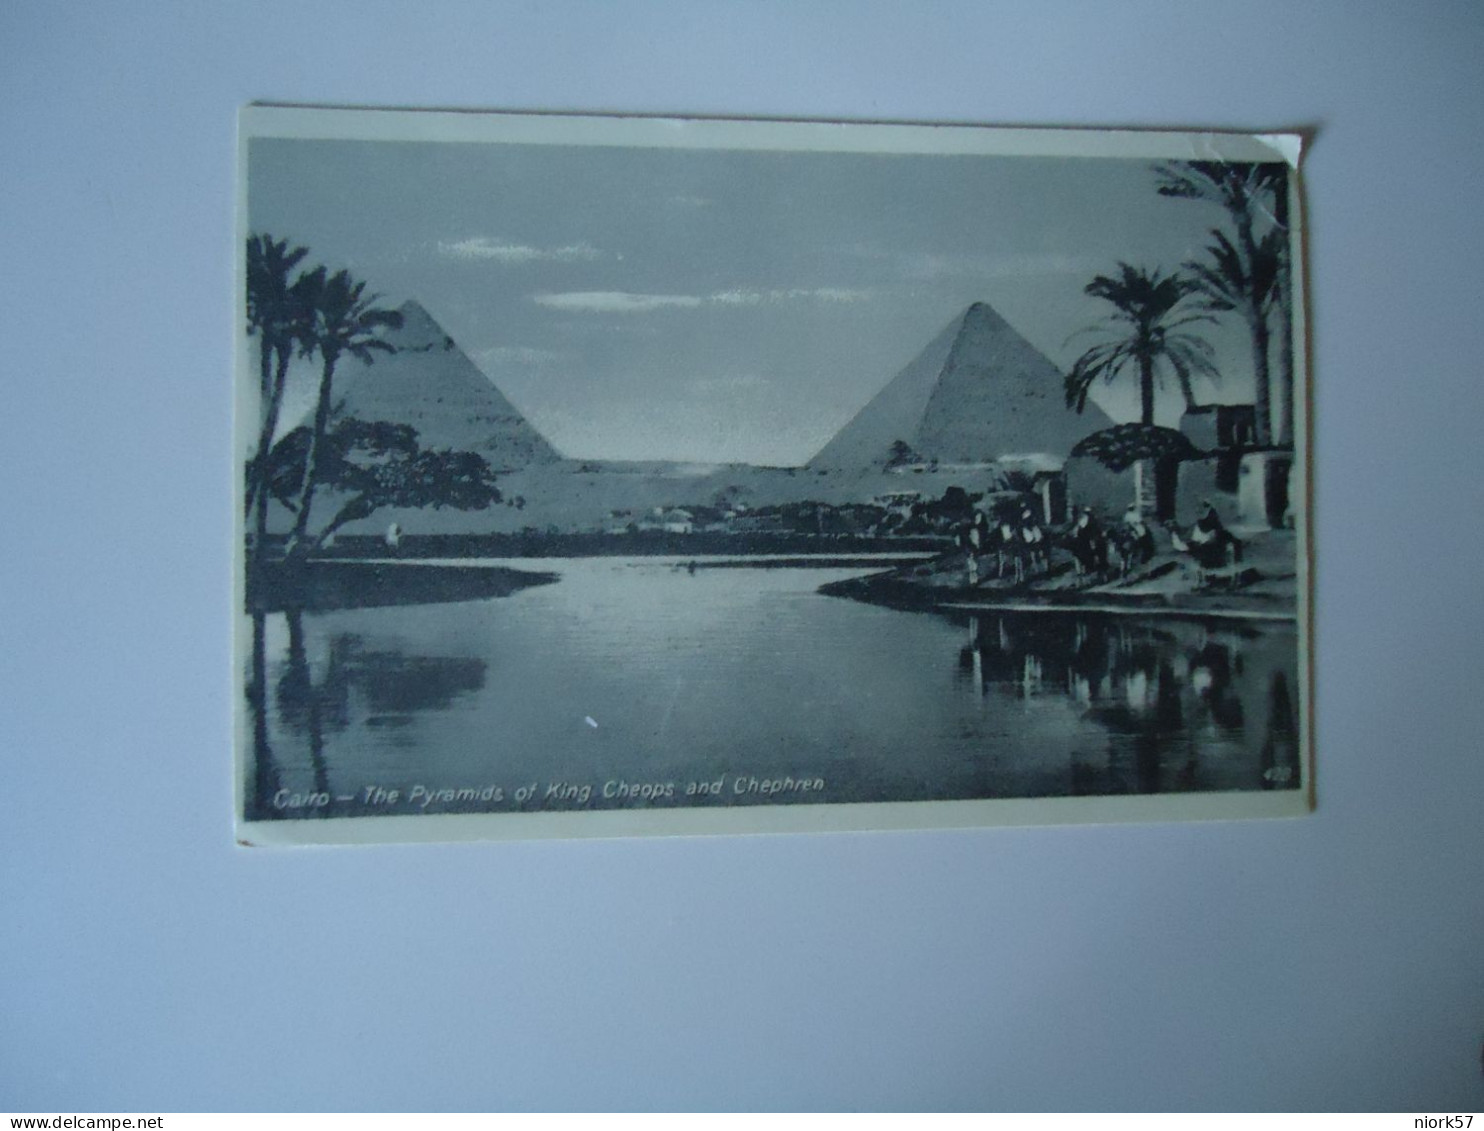 EGYPT   POSTCARDS 1952 CAIRO  PYRAMIDES POSTED GREECE  PURHRSAPS 10% DISCOUNT - Other & Unclassified